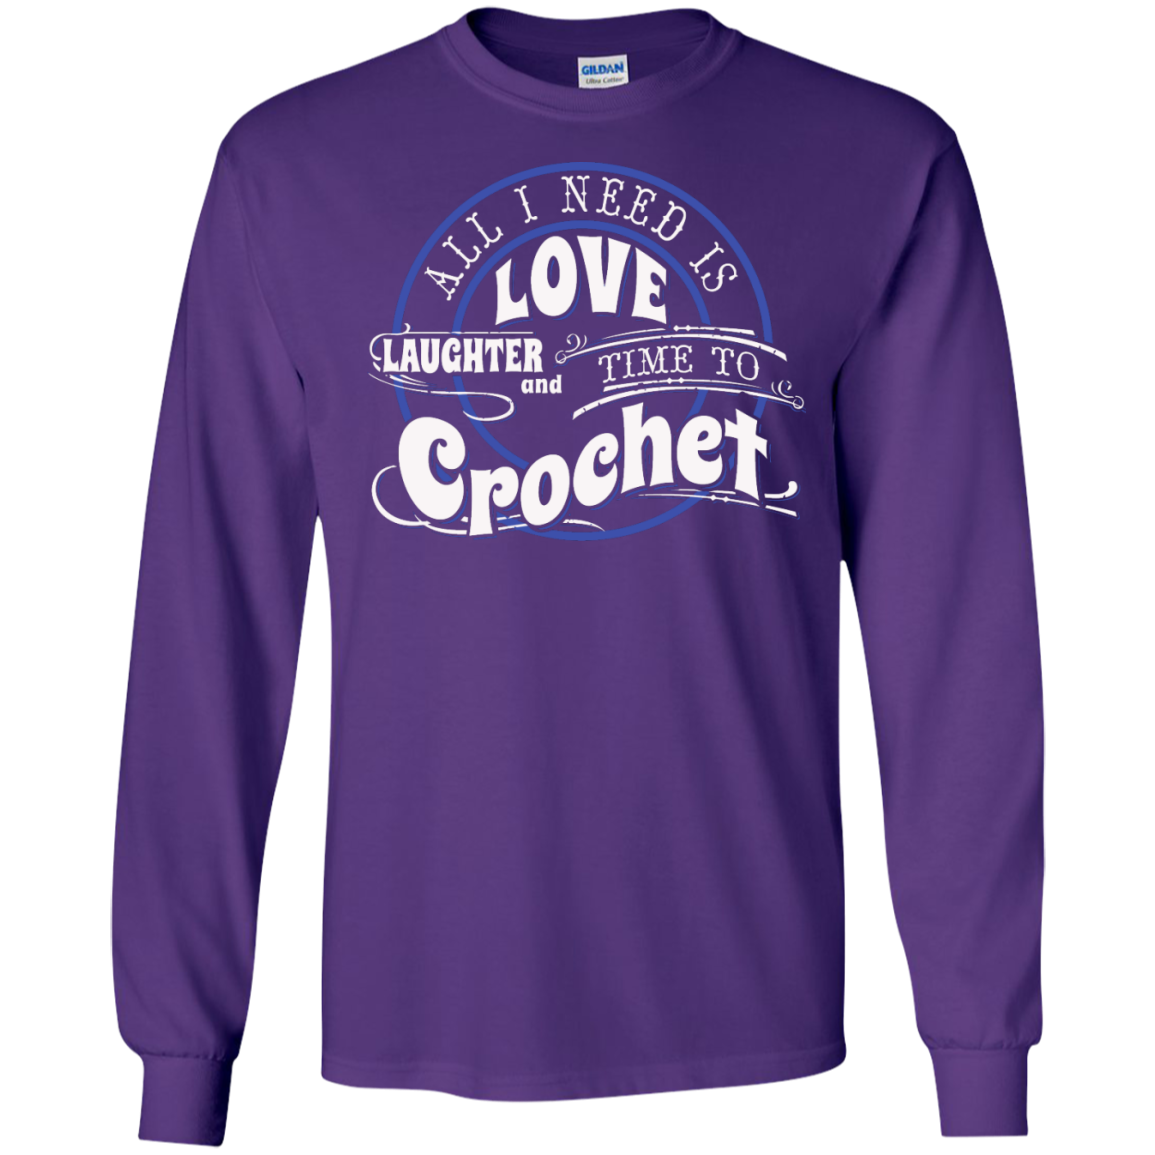 Time to Crochet Long Sleeve Ultra Cotton T-Shirt - Crafter4Life - 12